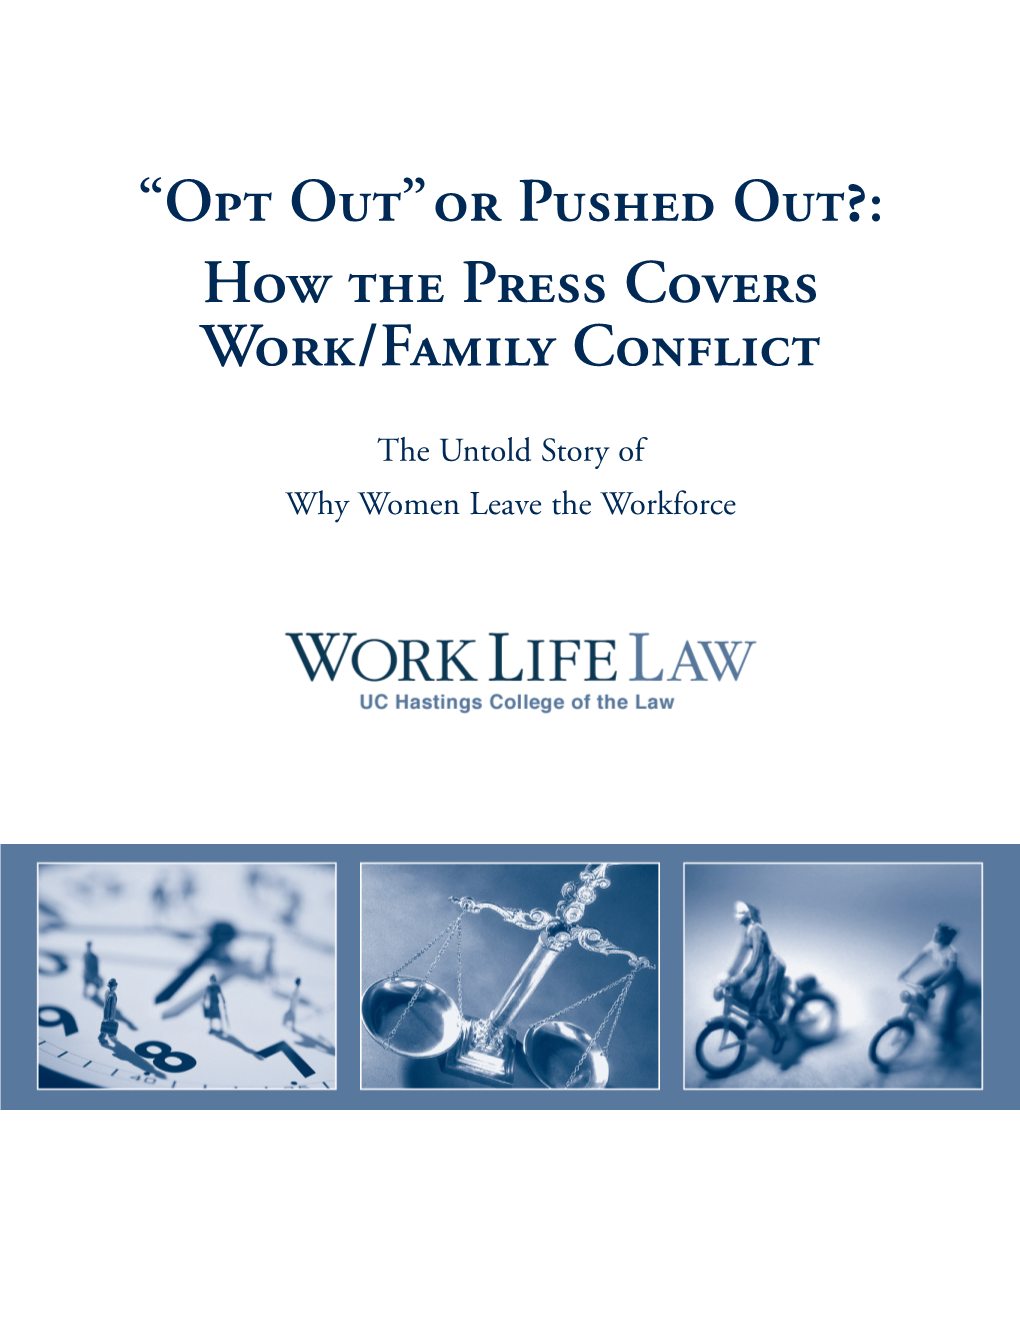 Opt Out” Or Pushed Out?: How the Press Covers Work/Family Conflict